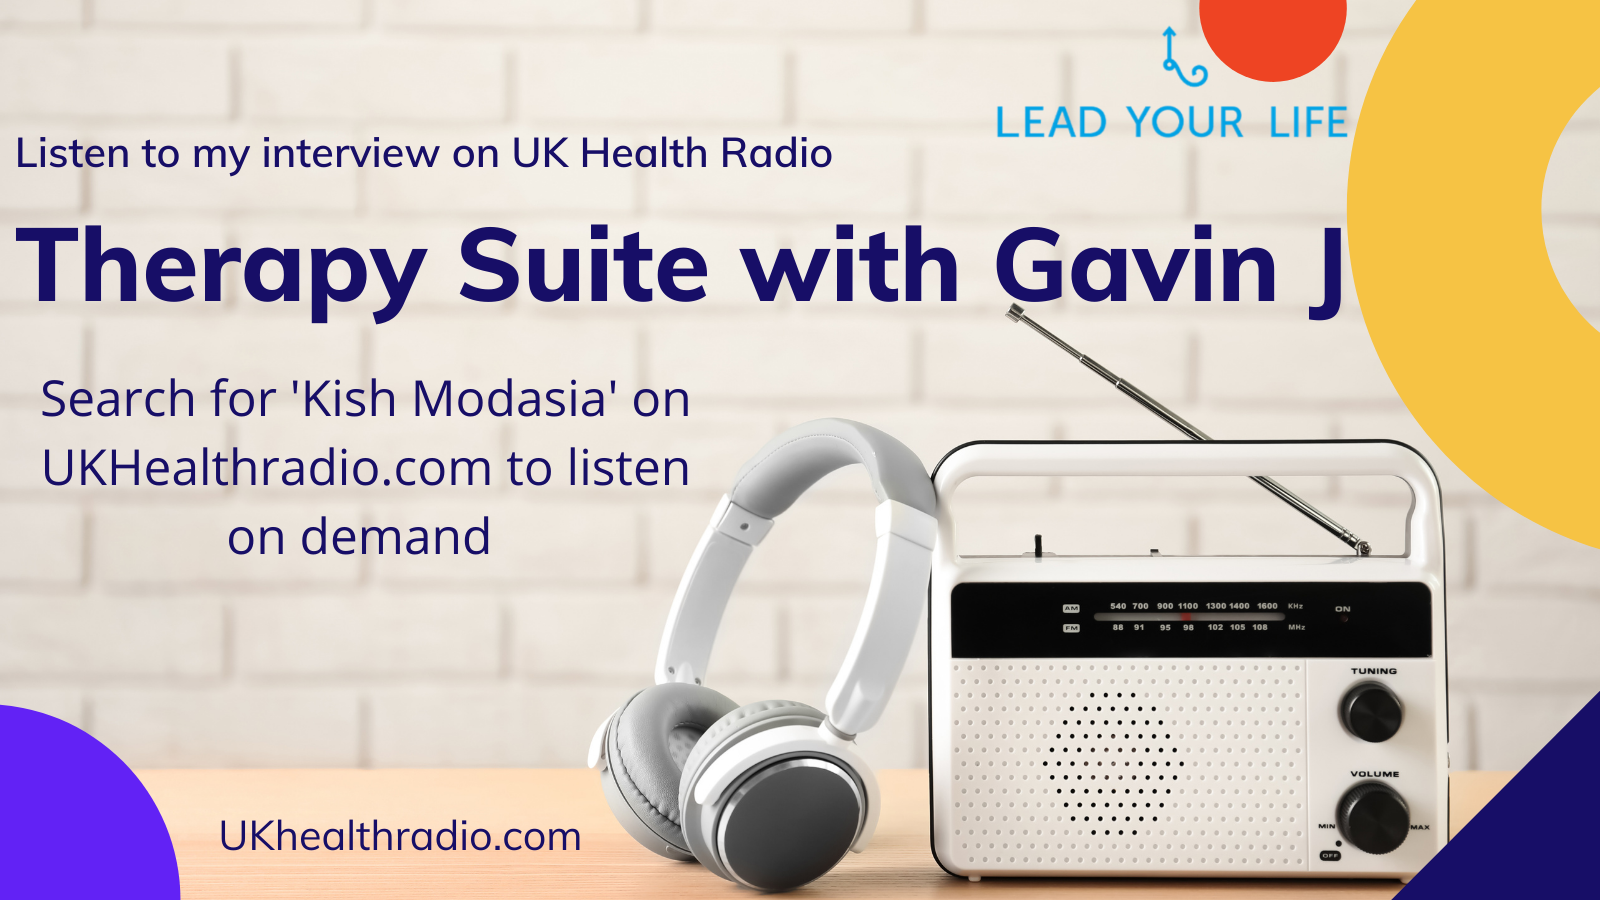 Interview with Gavin J on UK Health Radio (click to listen)